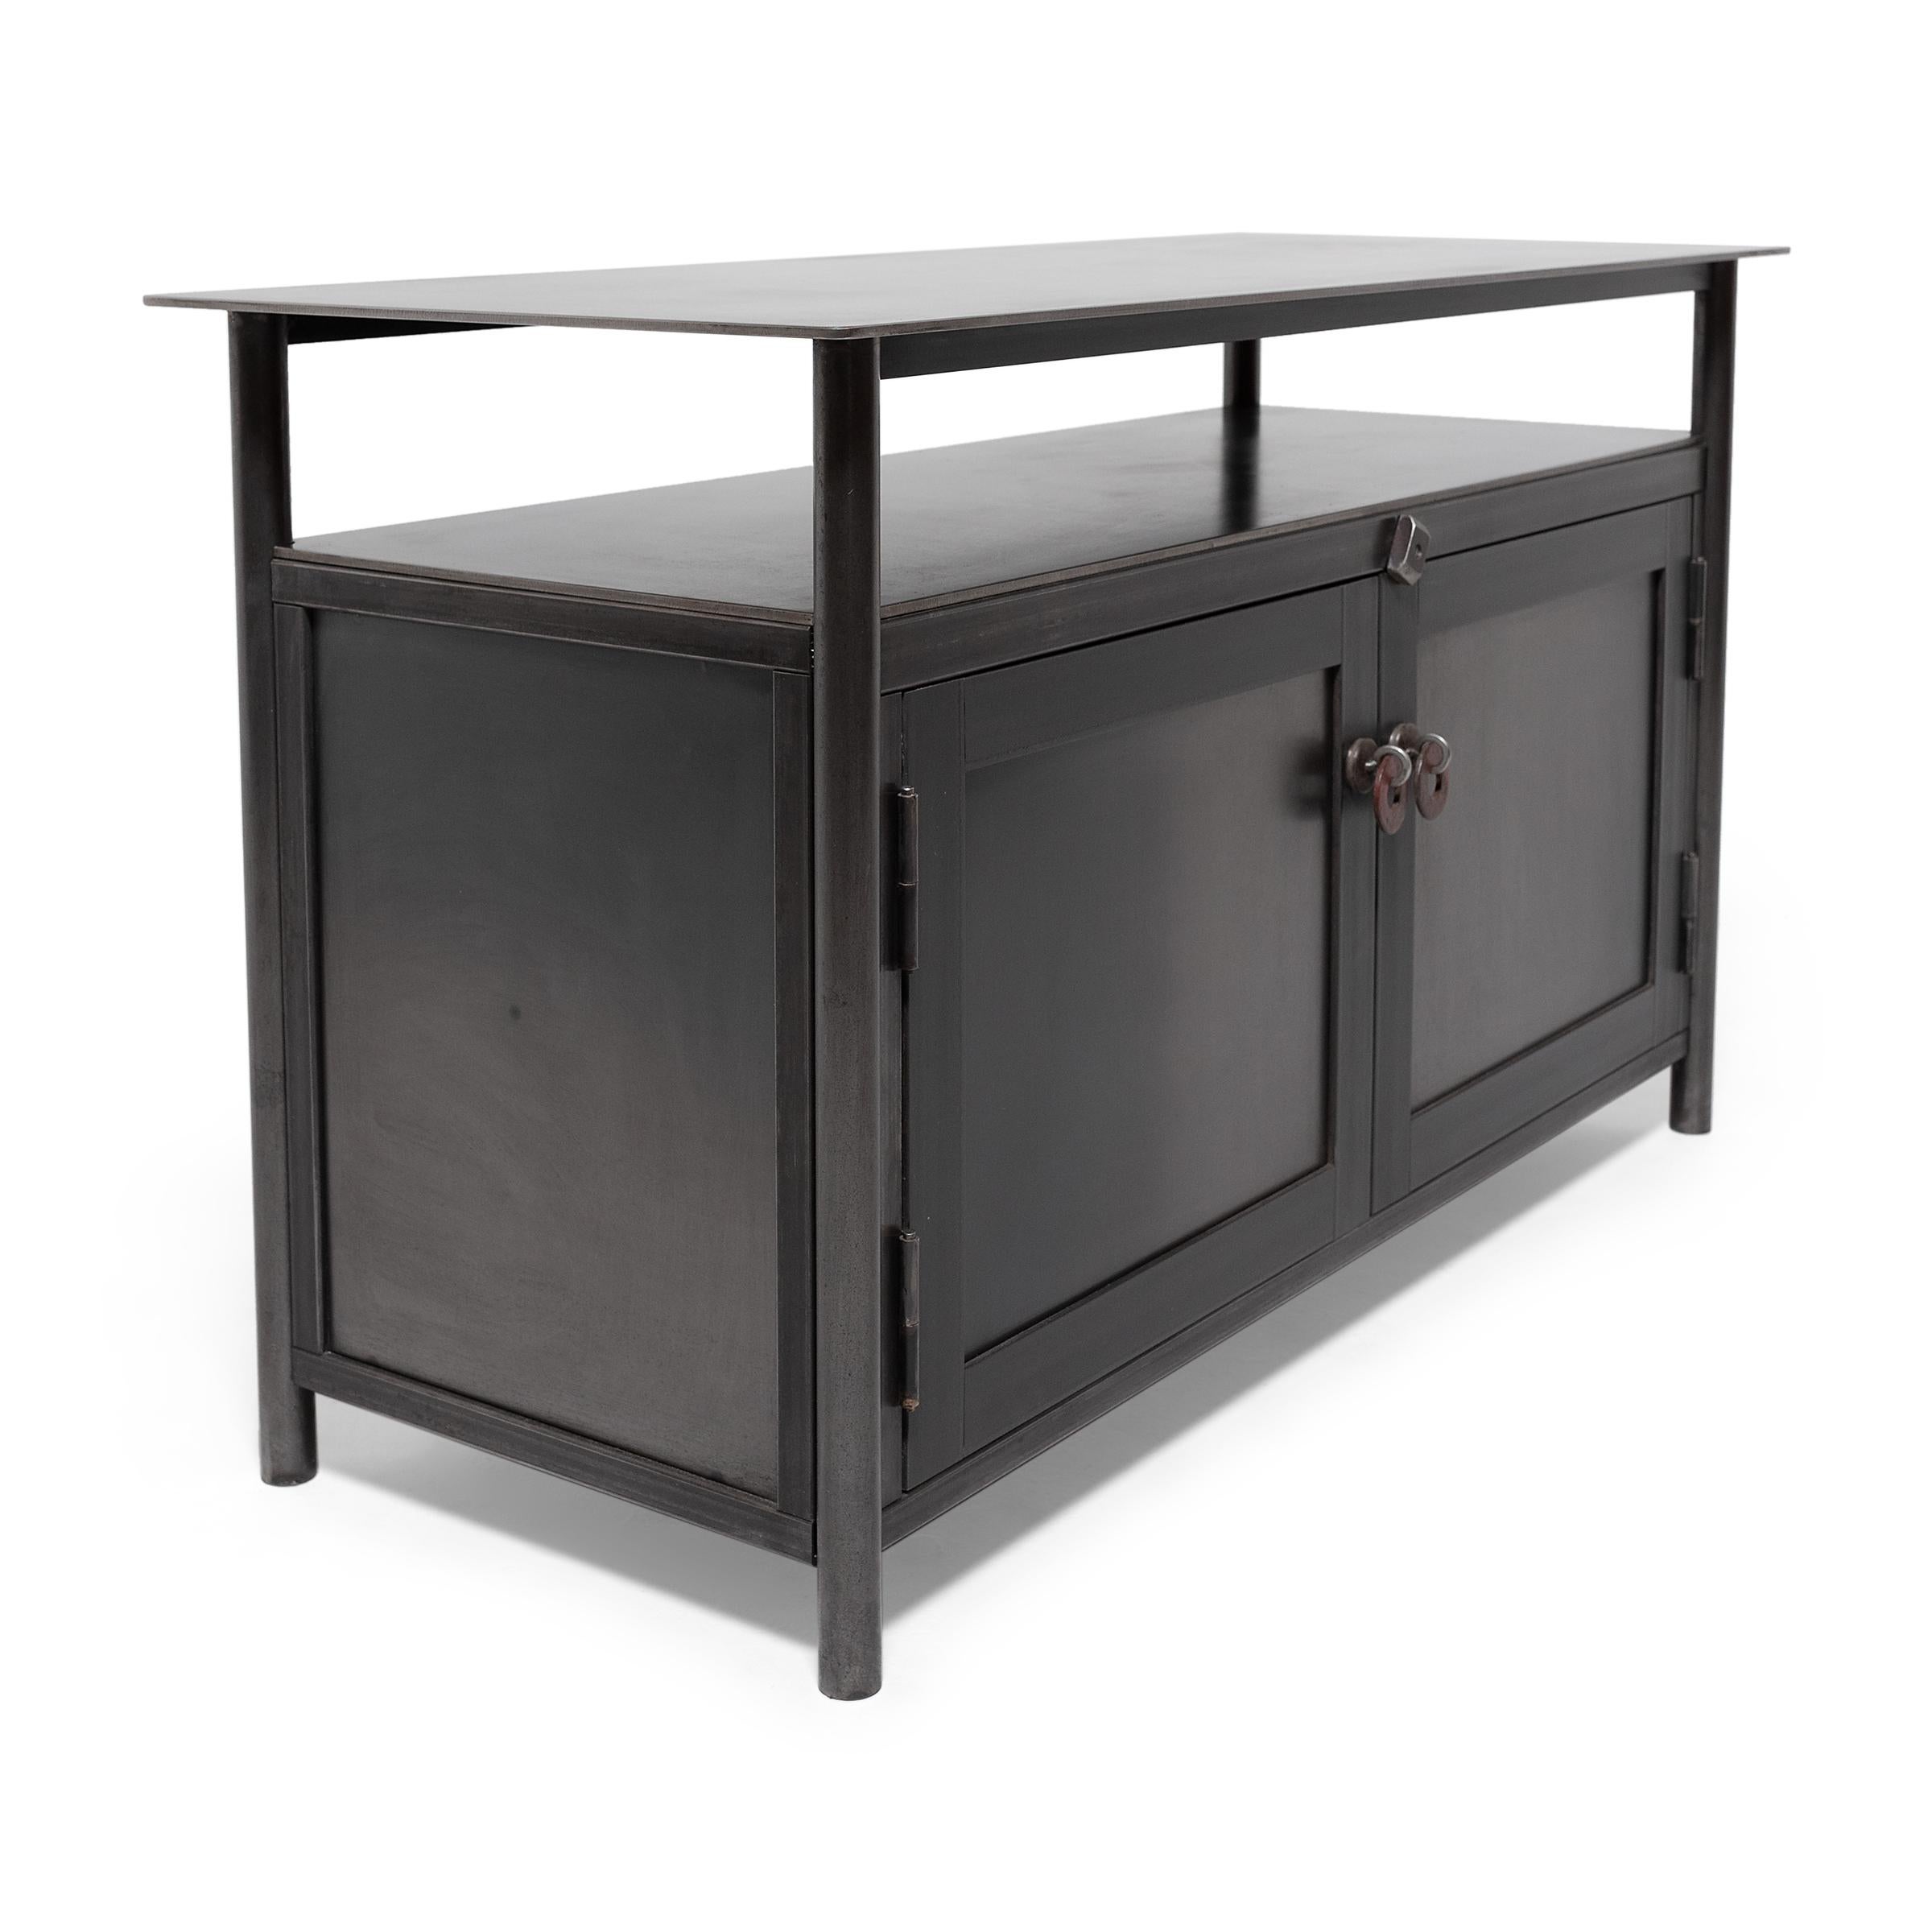 Created exclusively for PAGODA RED, the Ming Steel Collection by artist Jim Rose forges a connection between Shaker minimalism and the simplified lines and austere aesthetic of Ming-dynasty furniture. The culmination of years of studying the